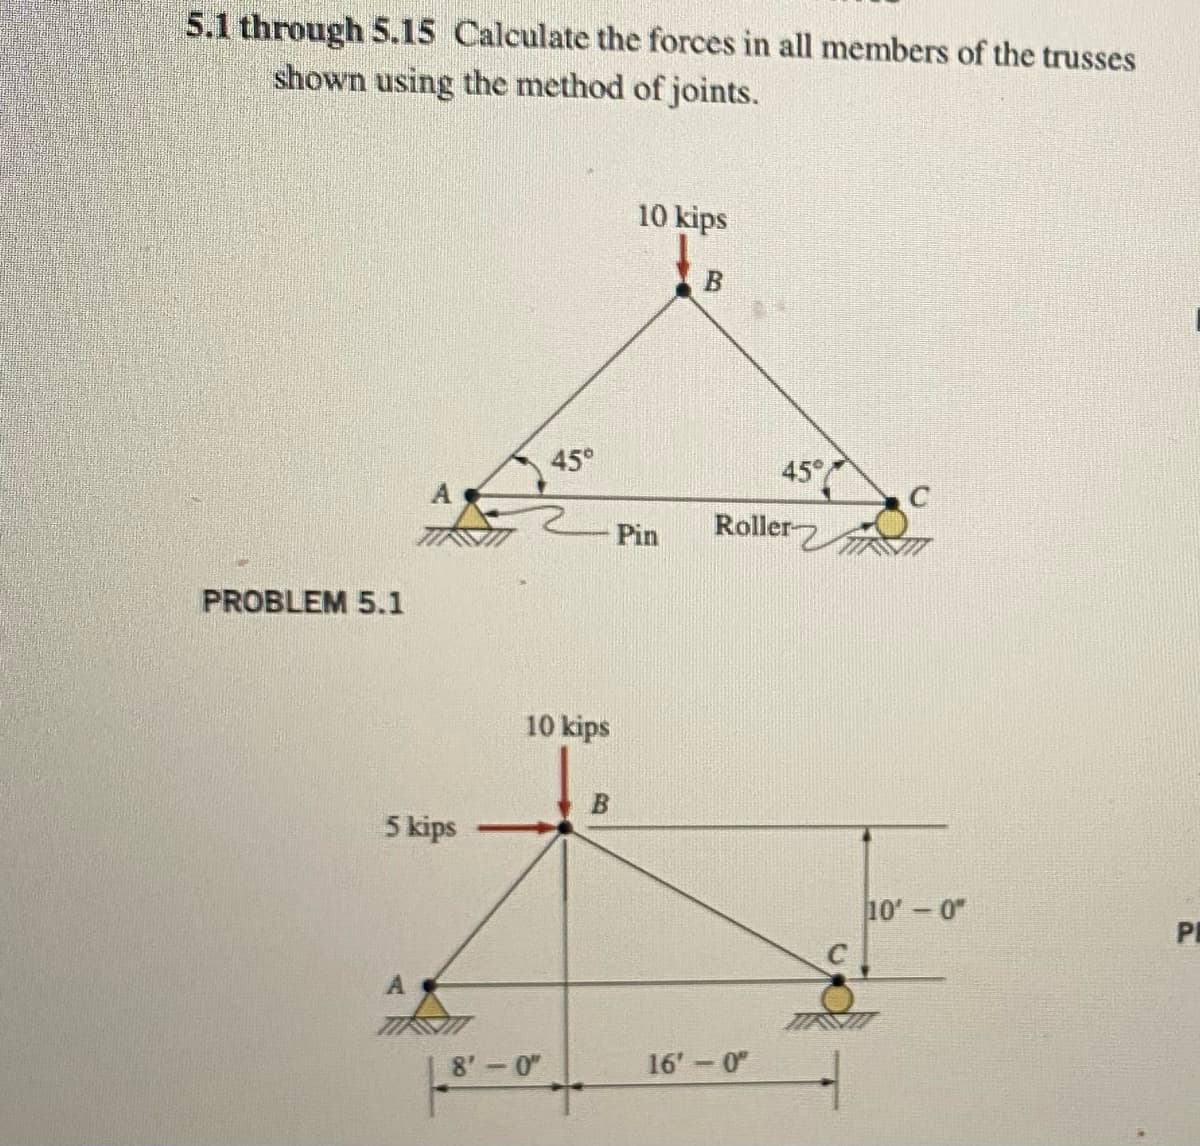 5.1 through 5.15 Calculate the forces in all members of the trusses
shown using the method of joints.
10 kips
В
45°
45°
Pin
Rollerz
PROBLEM 5.1
10 kips
5 kips
10 0"
PI
8'-0"
16' 0"
